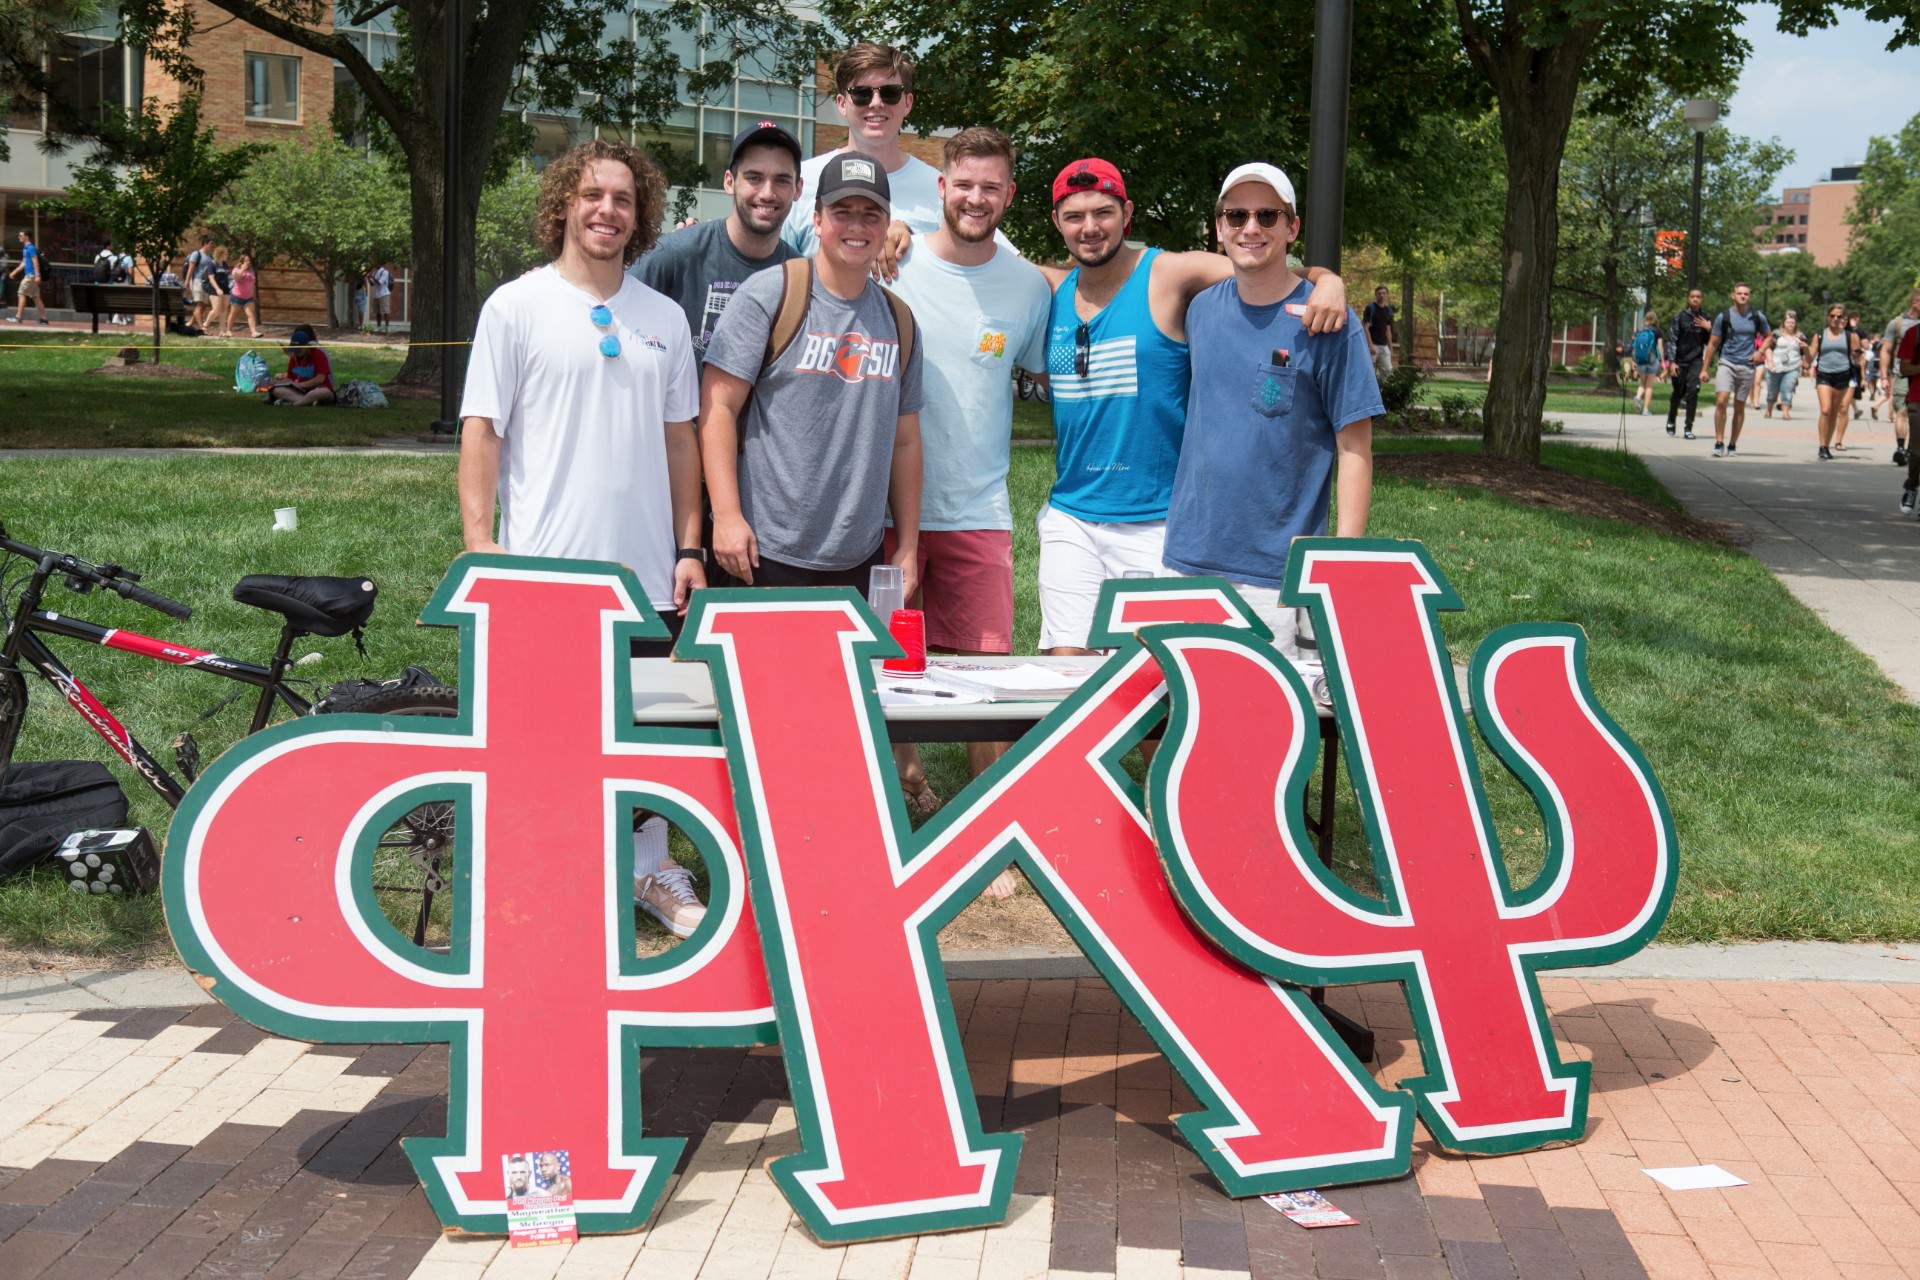 Group of fraternity members standing together behind letters sign